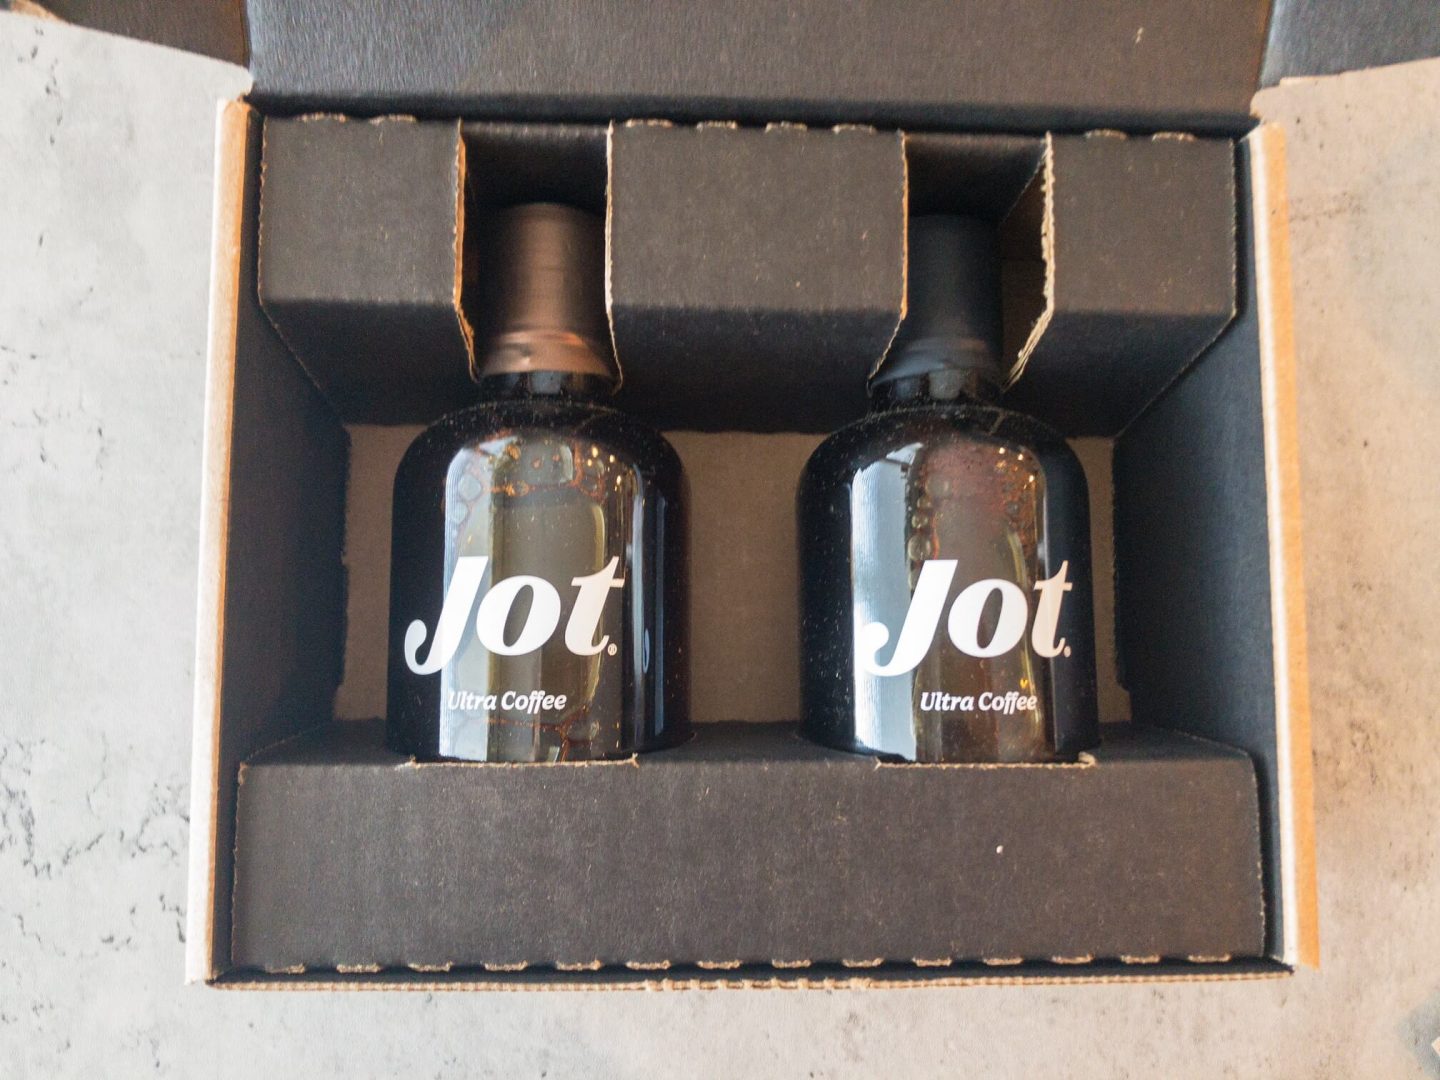 jot coffee review